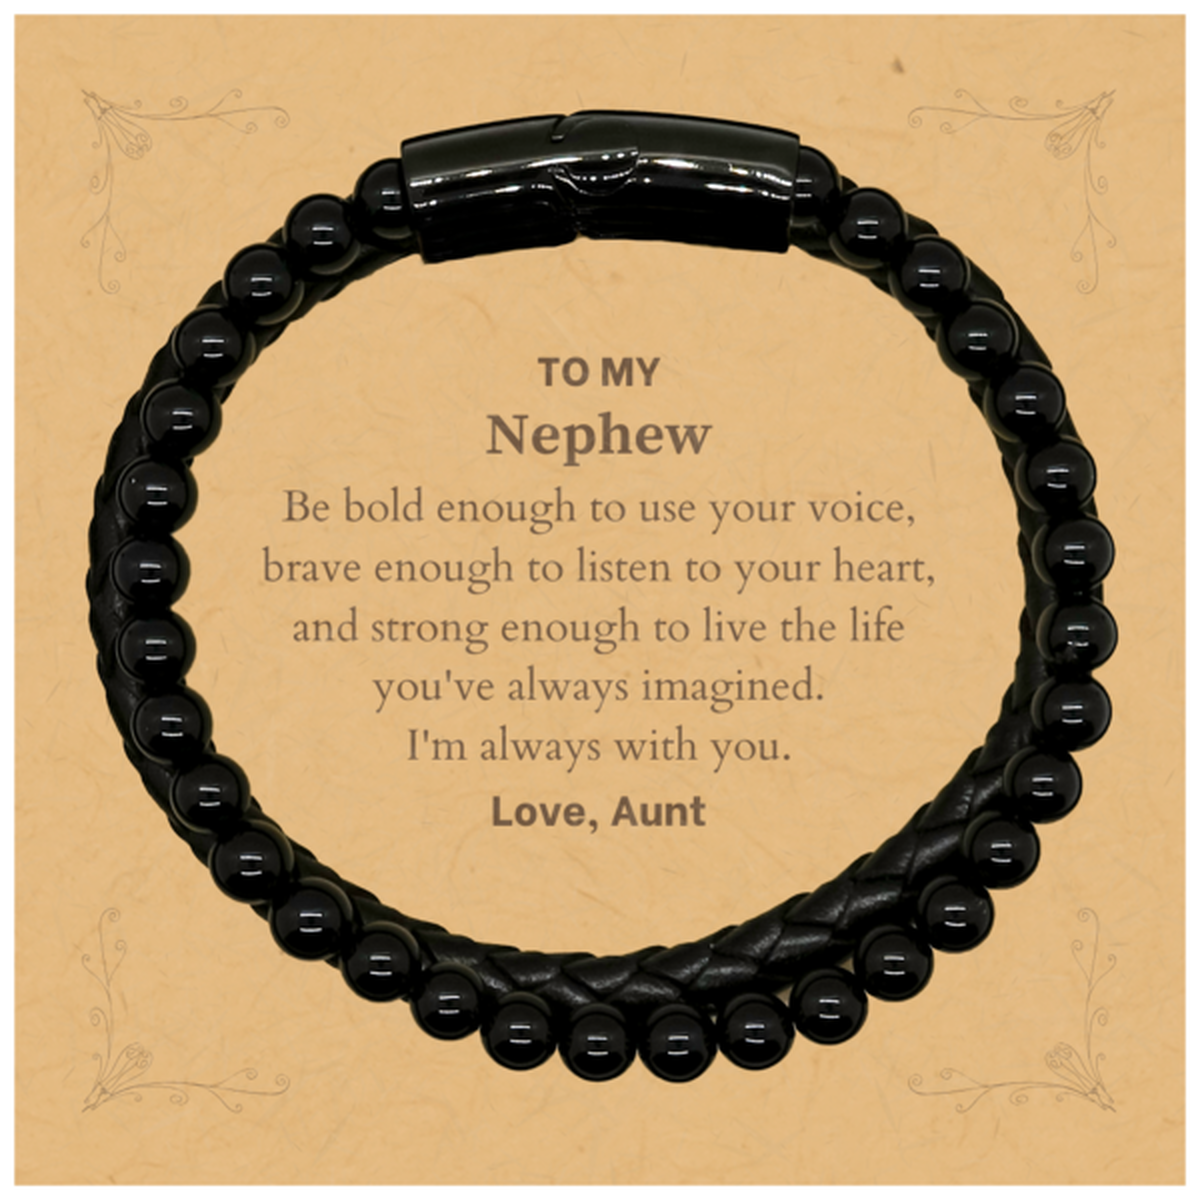 Keepsake Nephew Stone Leather Bracelets Gift Idea Graduation Christmas Birthday Nephew from Aunt, Nephew Be bold enough to use your voice, brave enough to listen to your heart. Love, Aunt